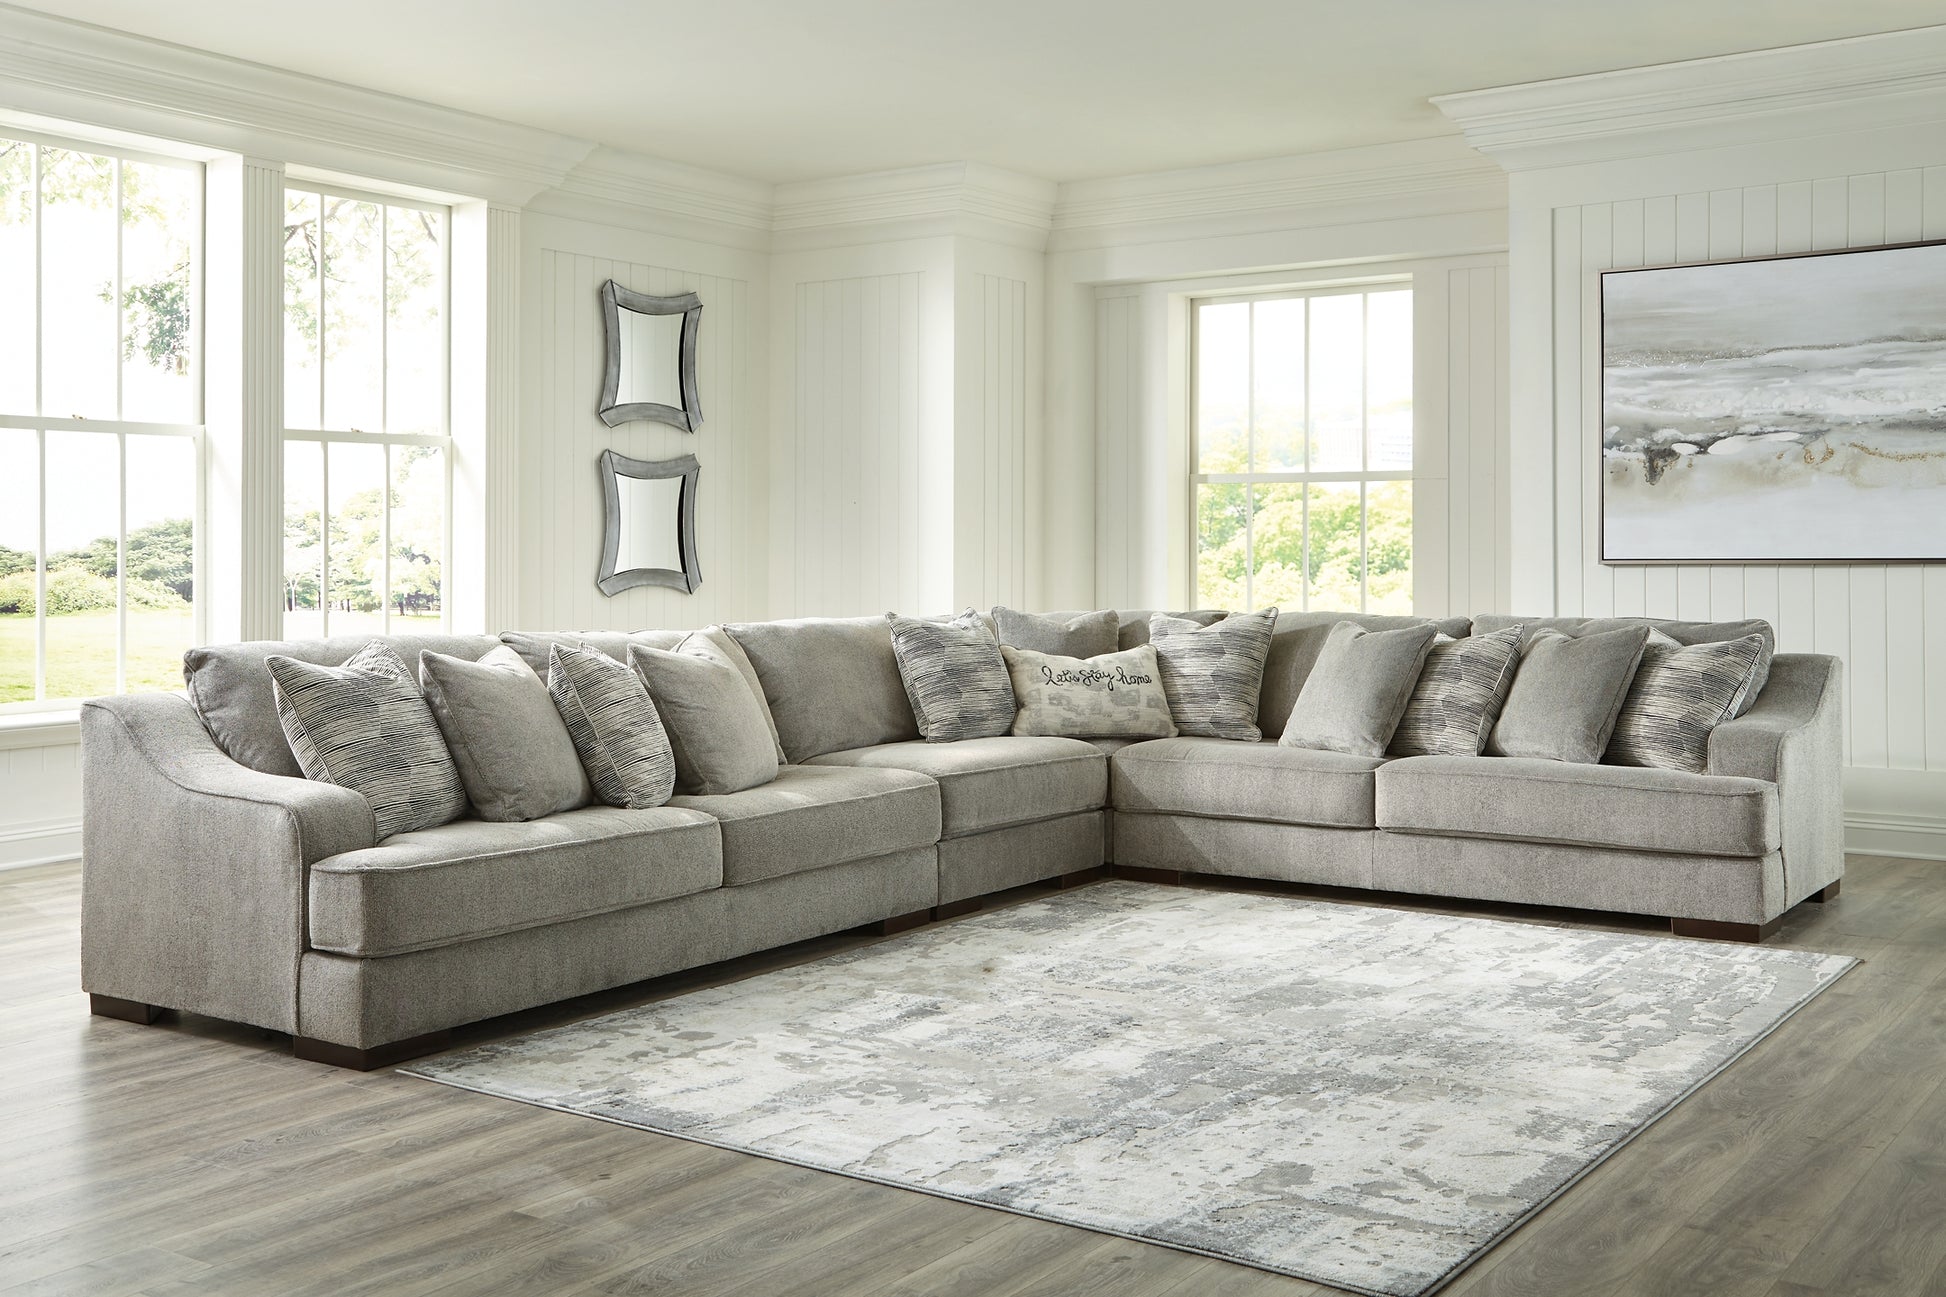 Bayless 4-Piece Sectional with Ottoman Wilson Furniture (OH)  in Bridgeport, Ohio. Serving Bridgeport, Yorkville, Bellaire, & Avondale